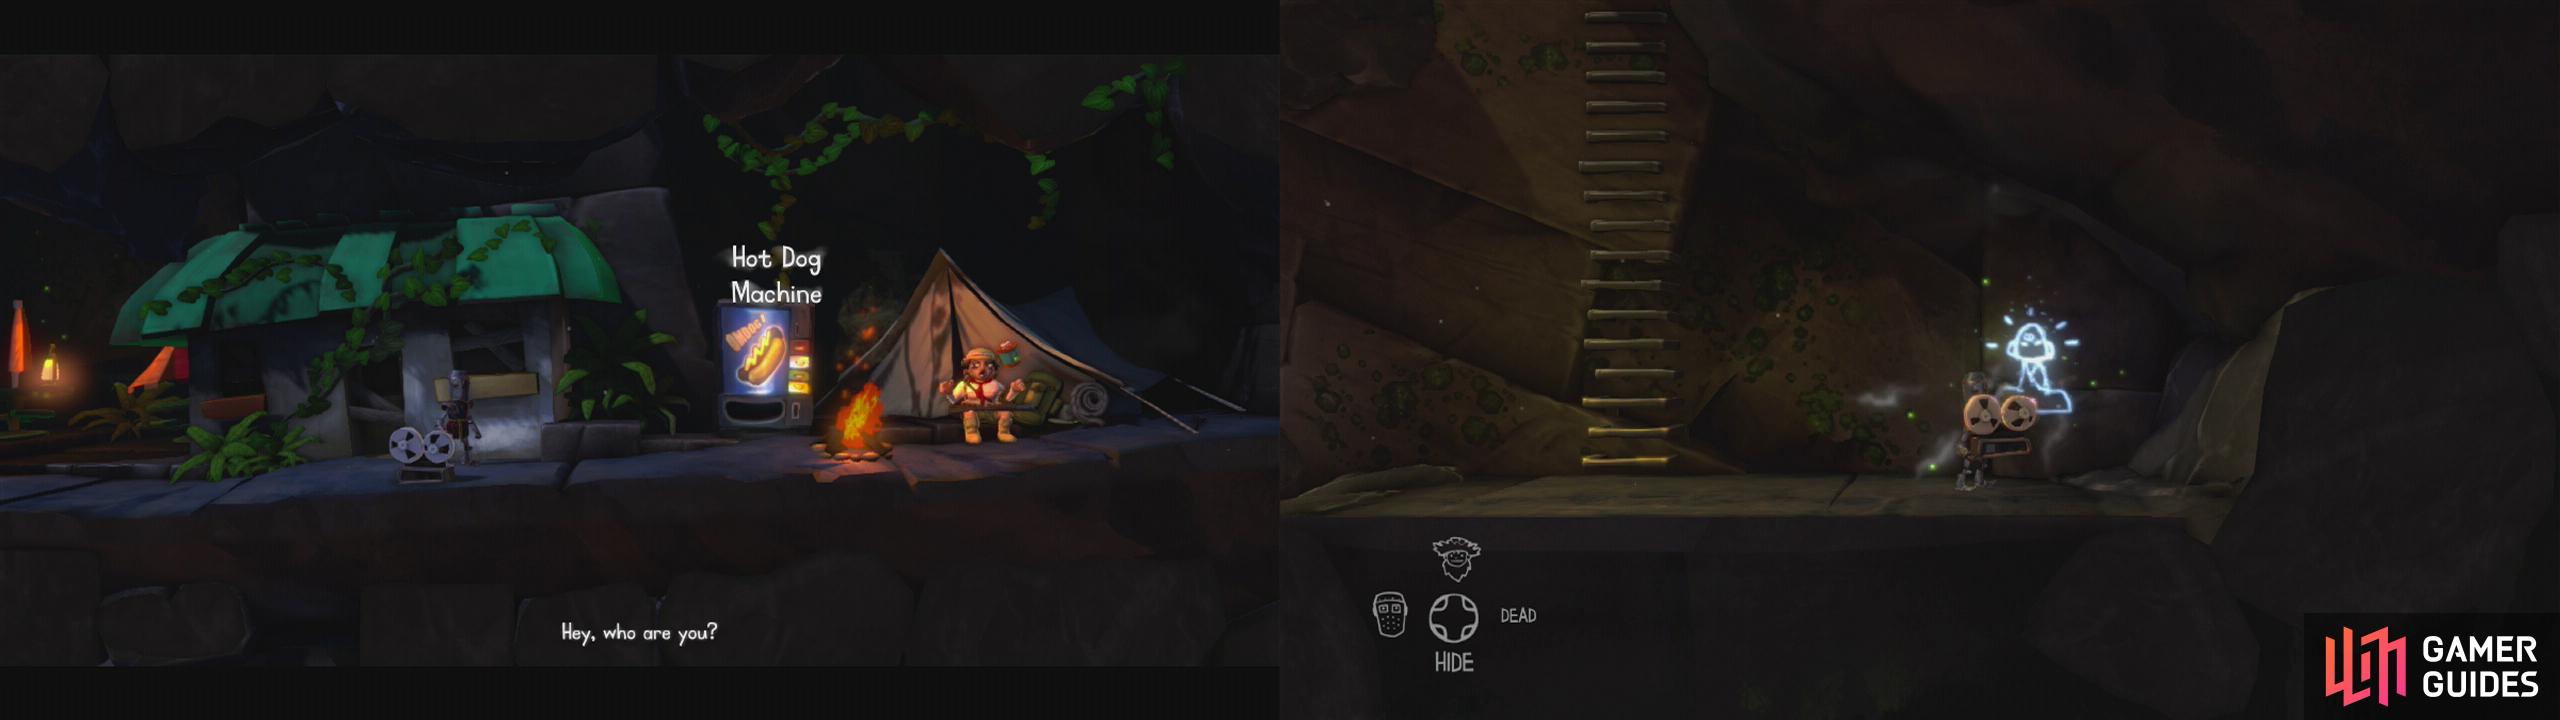 Find the hunter and grab the tape recorder that she throws at you (left). Climb down the ladder and pick up the Cave Painting (right).